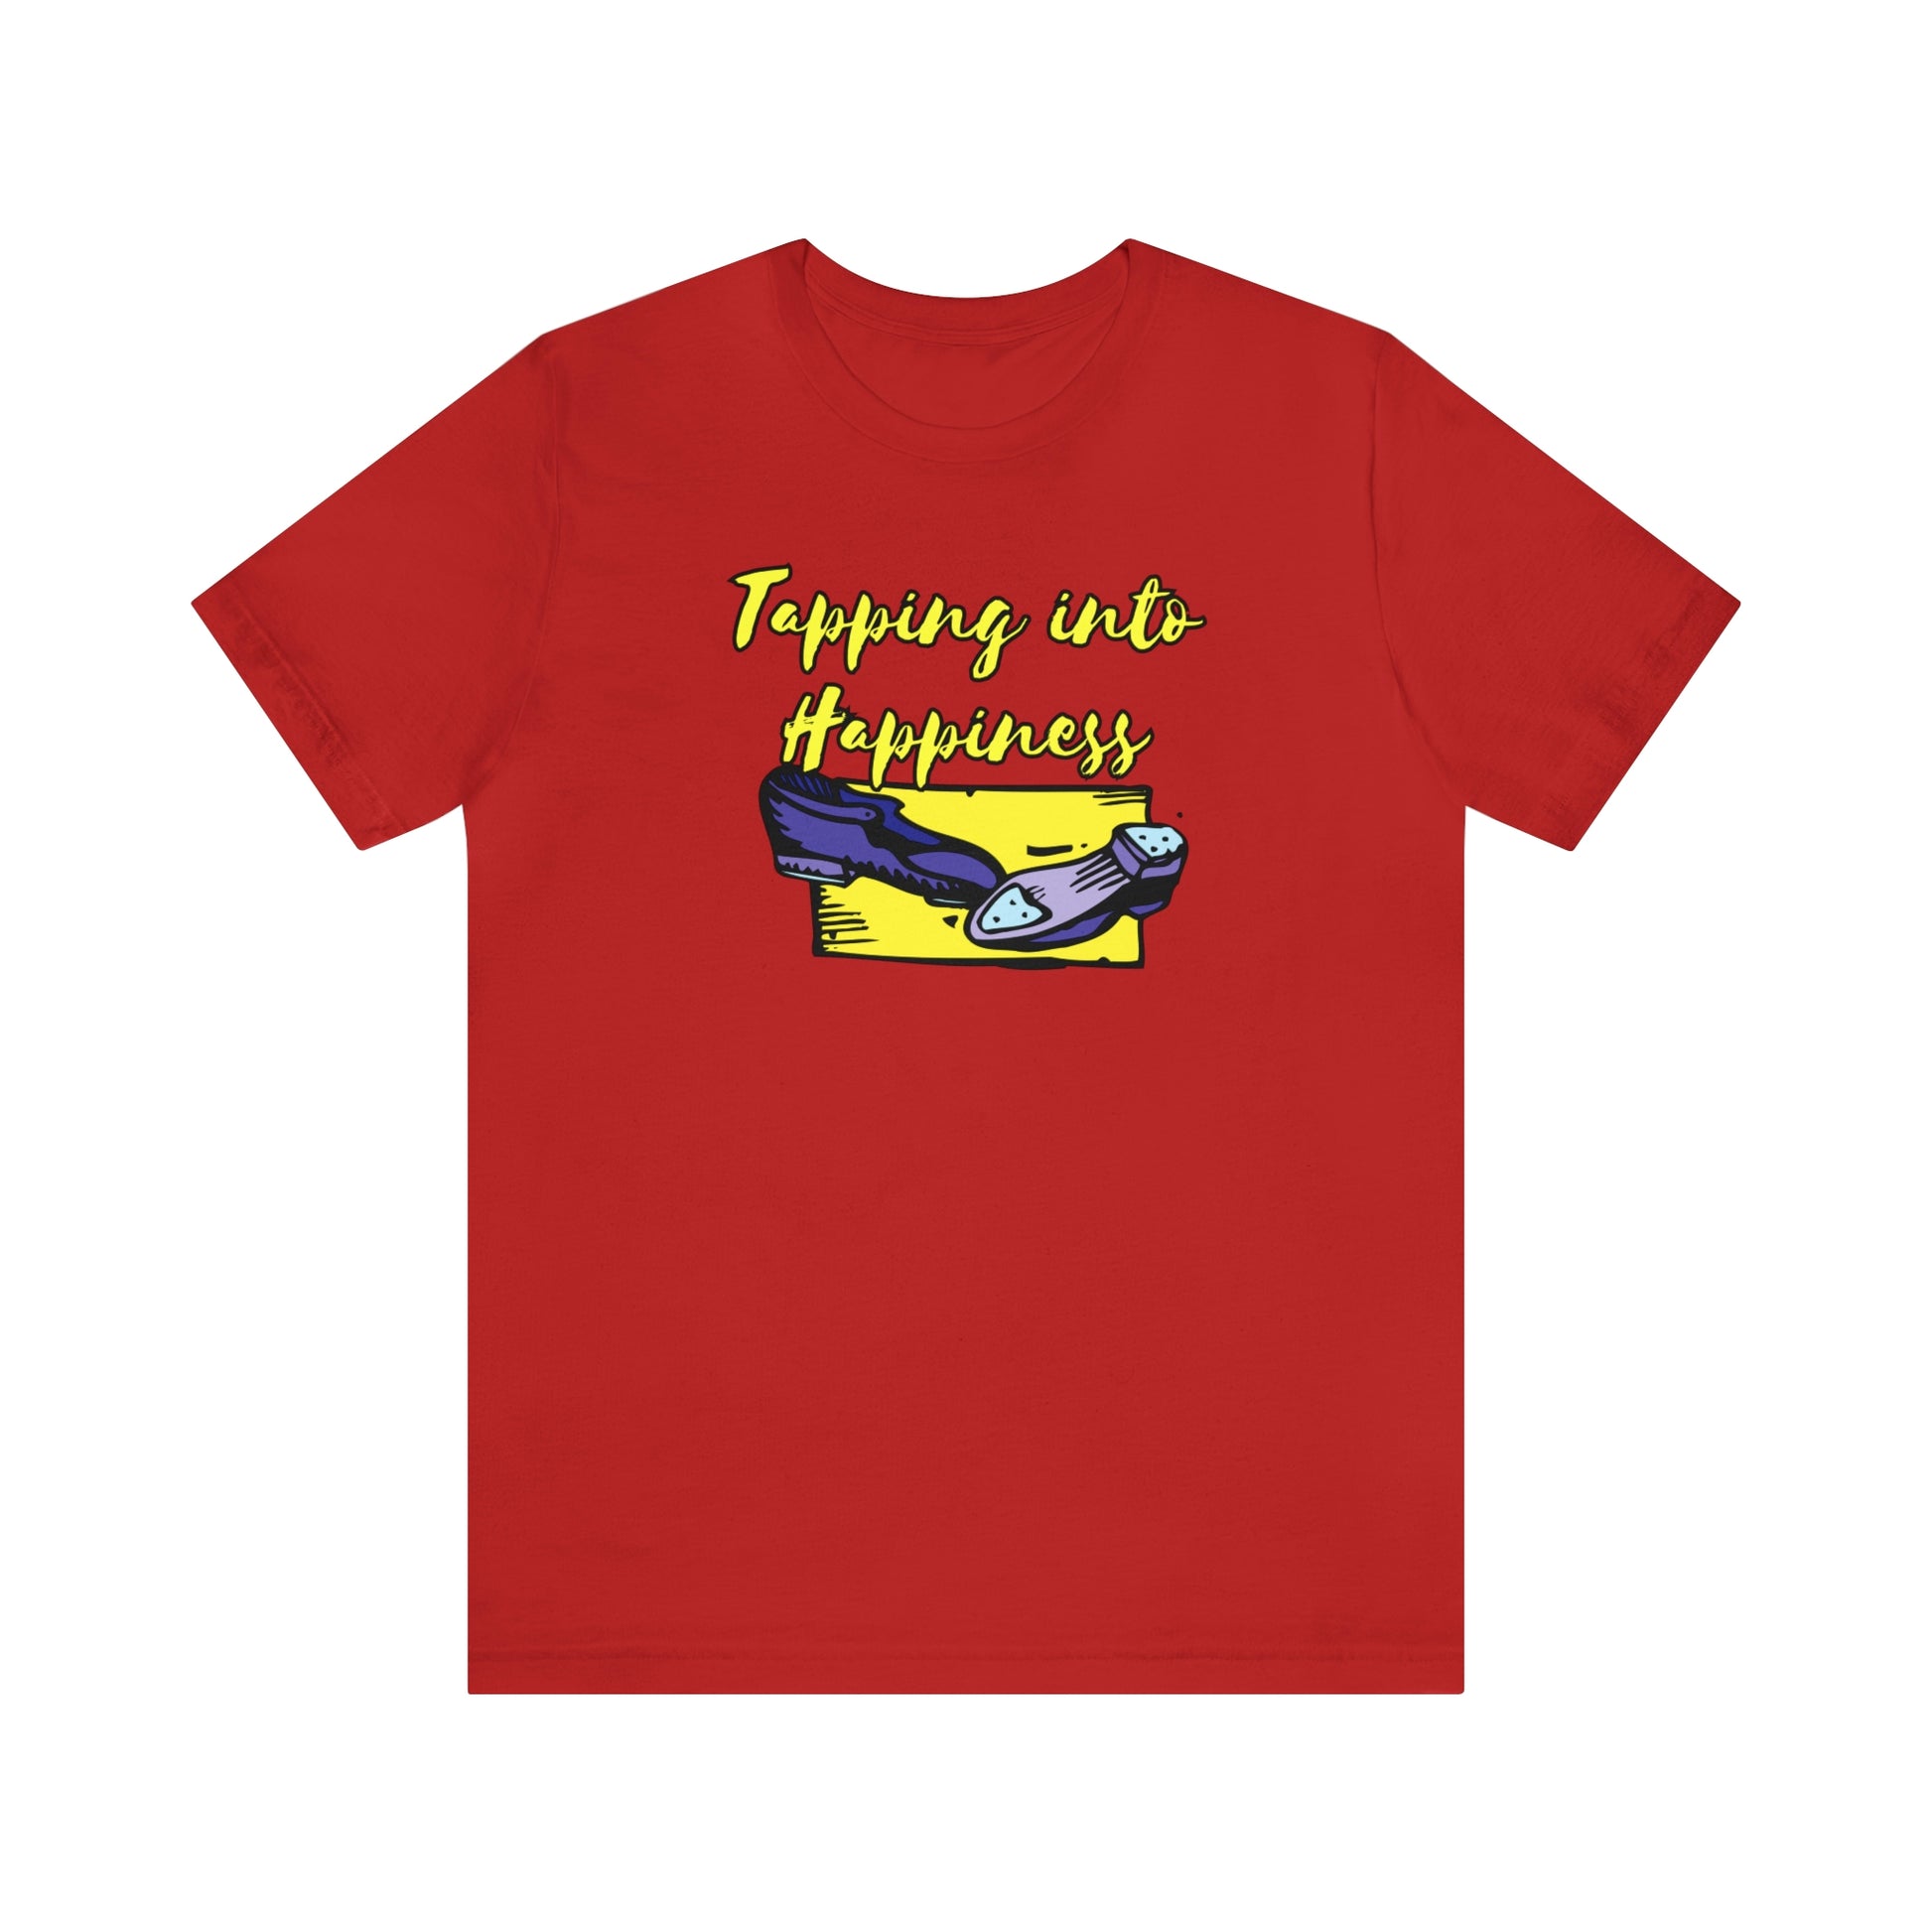 A tap dance tshirt with the text "Tapping into happines" and a picture of tap dance shoes. Great for tap dancers!